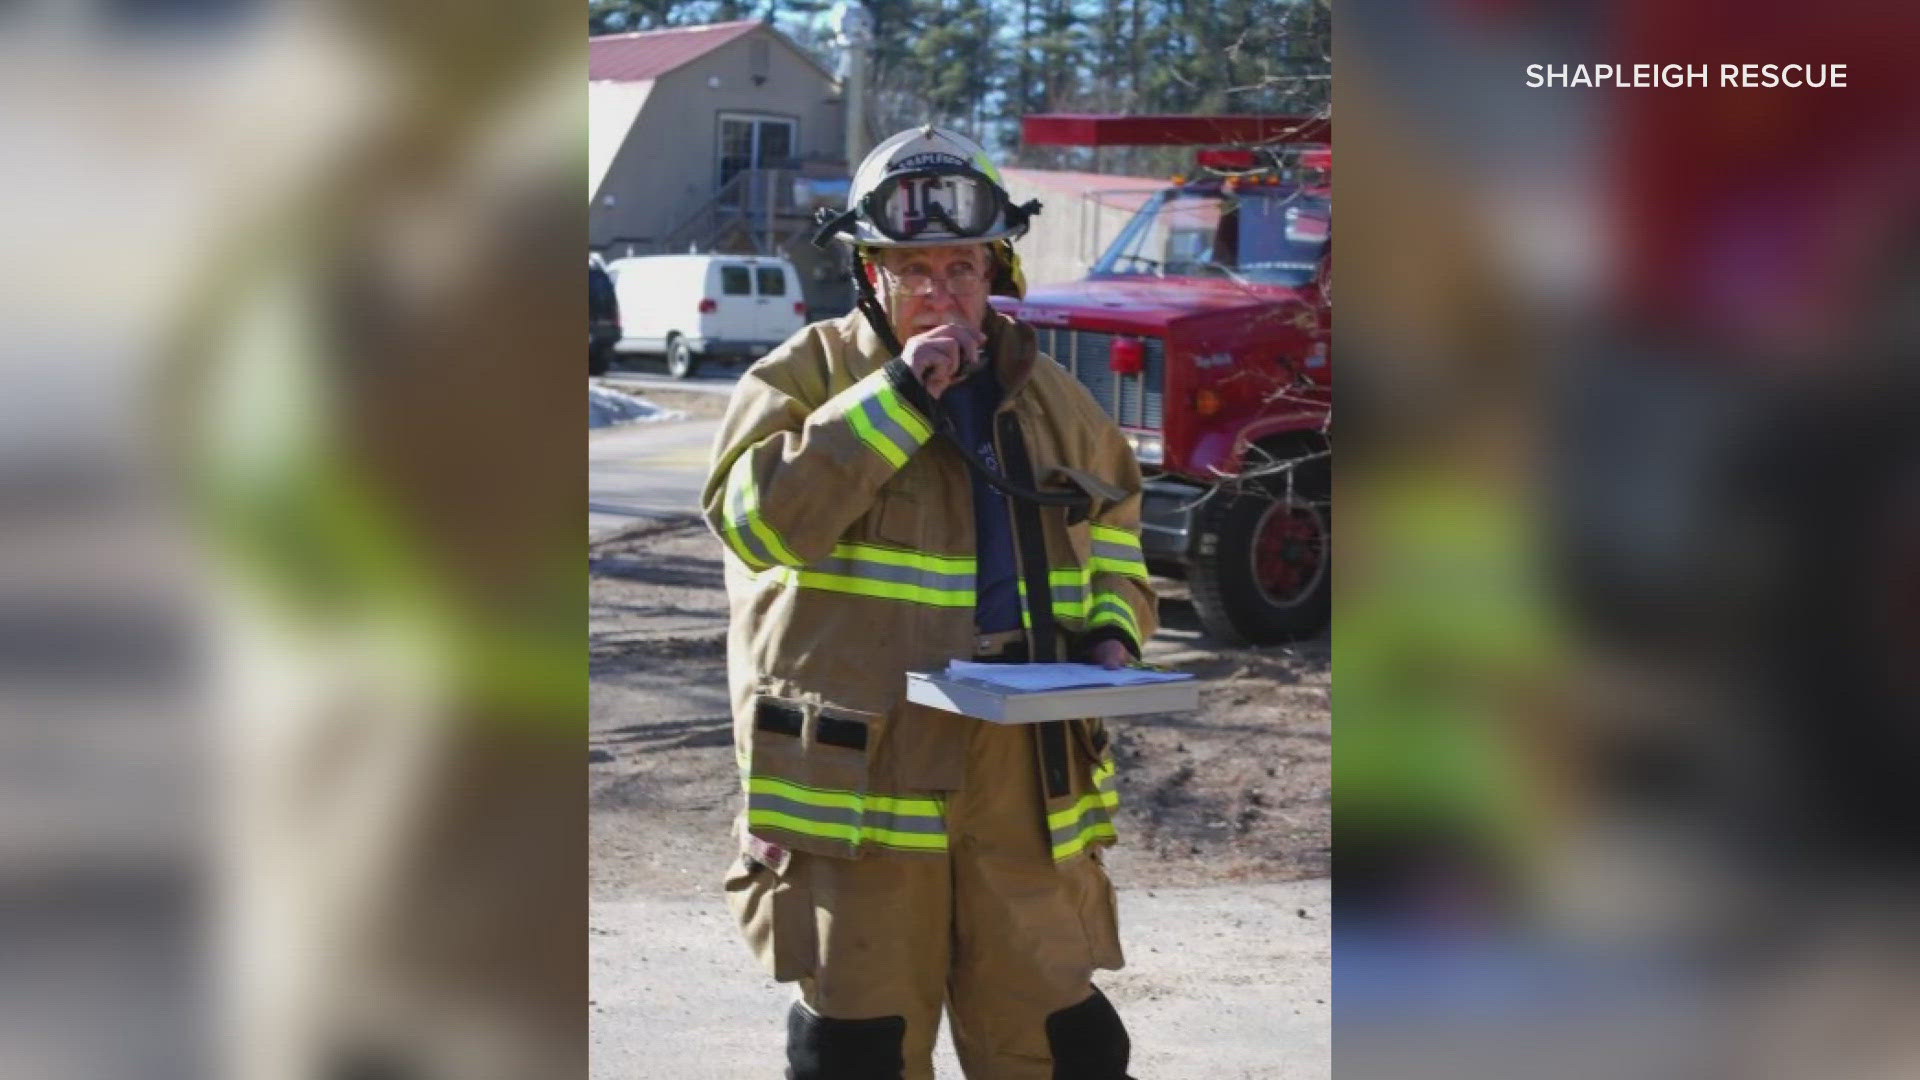 Duane Romano started with the Shapleigh Fire Department in 1992 and retired in 2020.